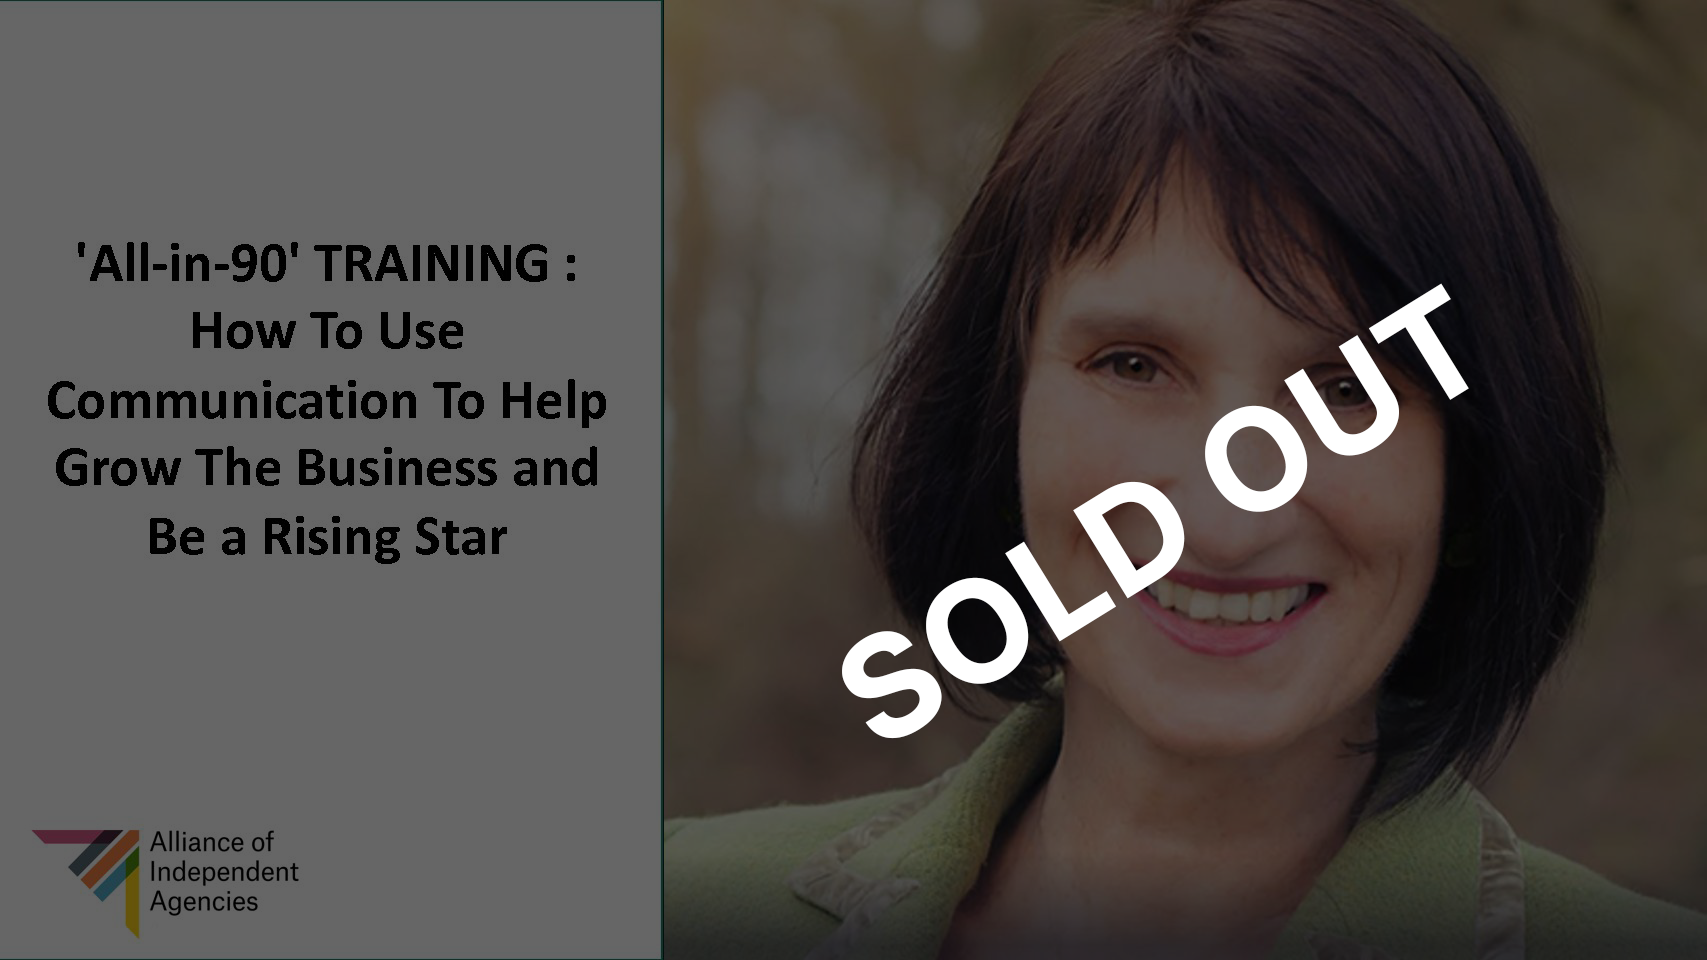 'All-in-90' TRAINING : How To Use Communication To Help Grow The Business and Be a Rising Star (SOLD OUT)